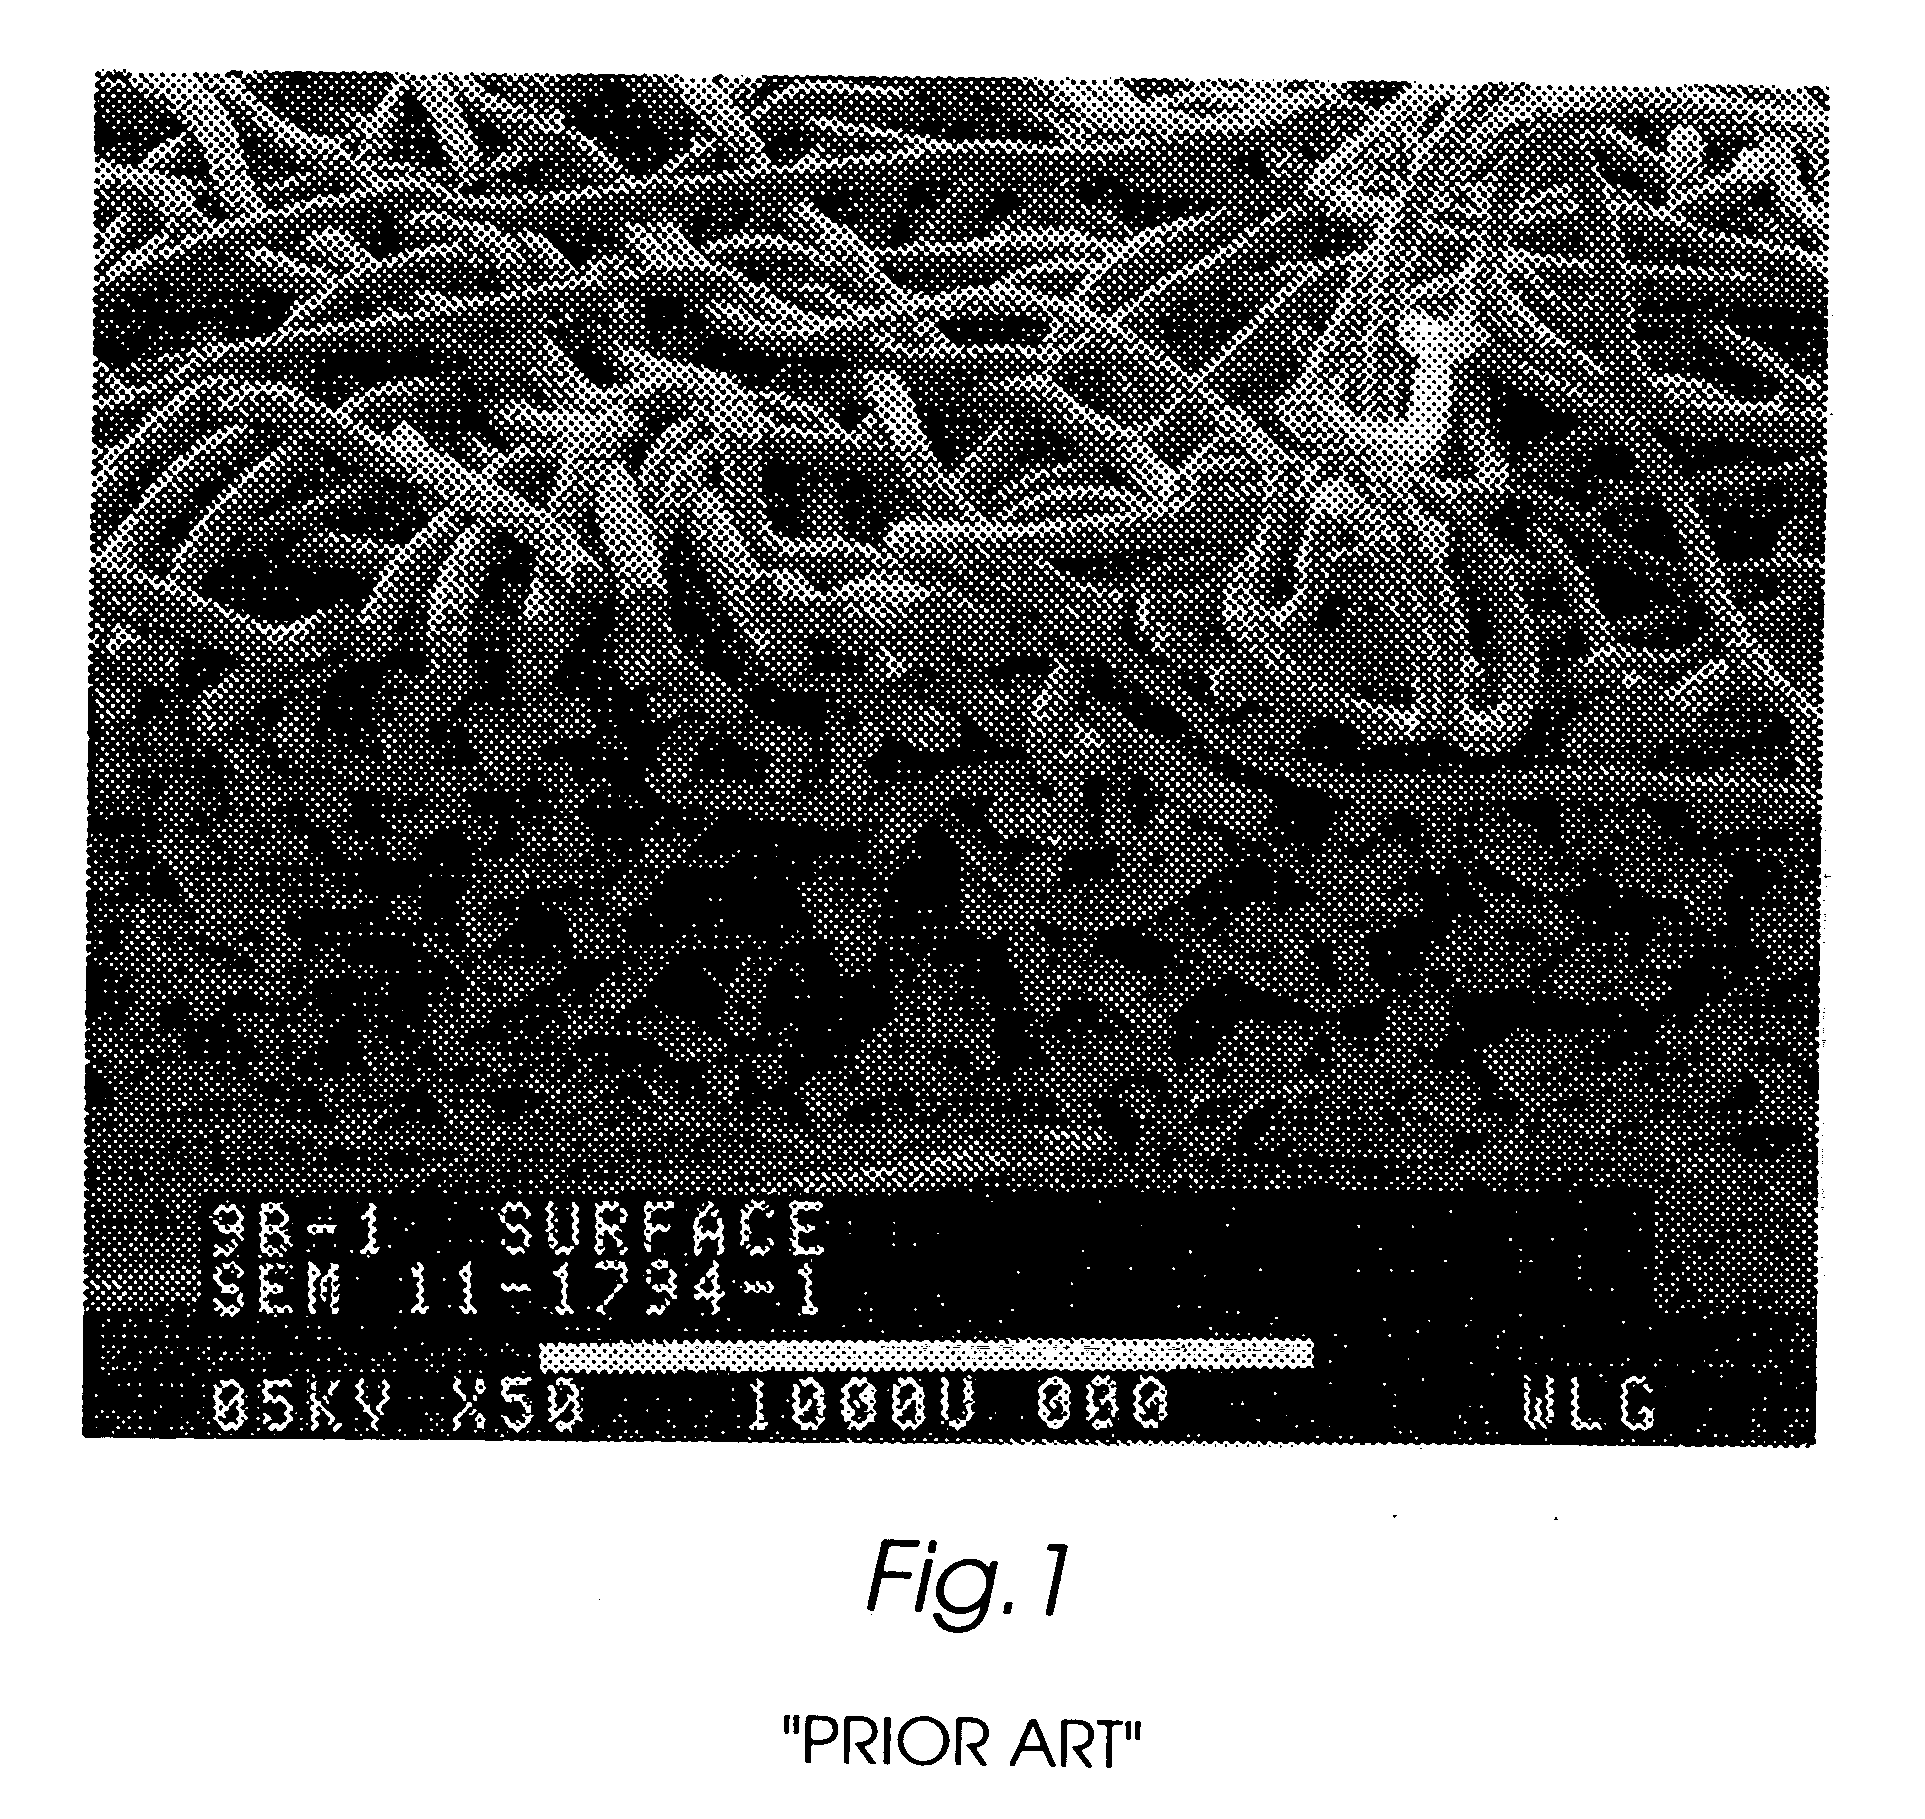 Composite self-cohered web materials